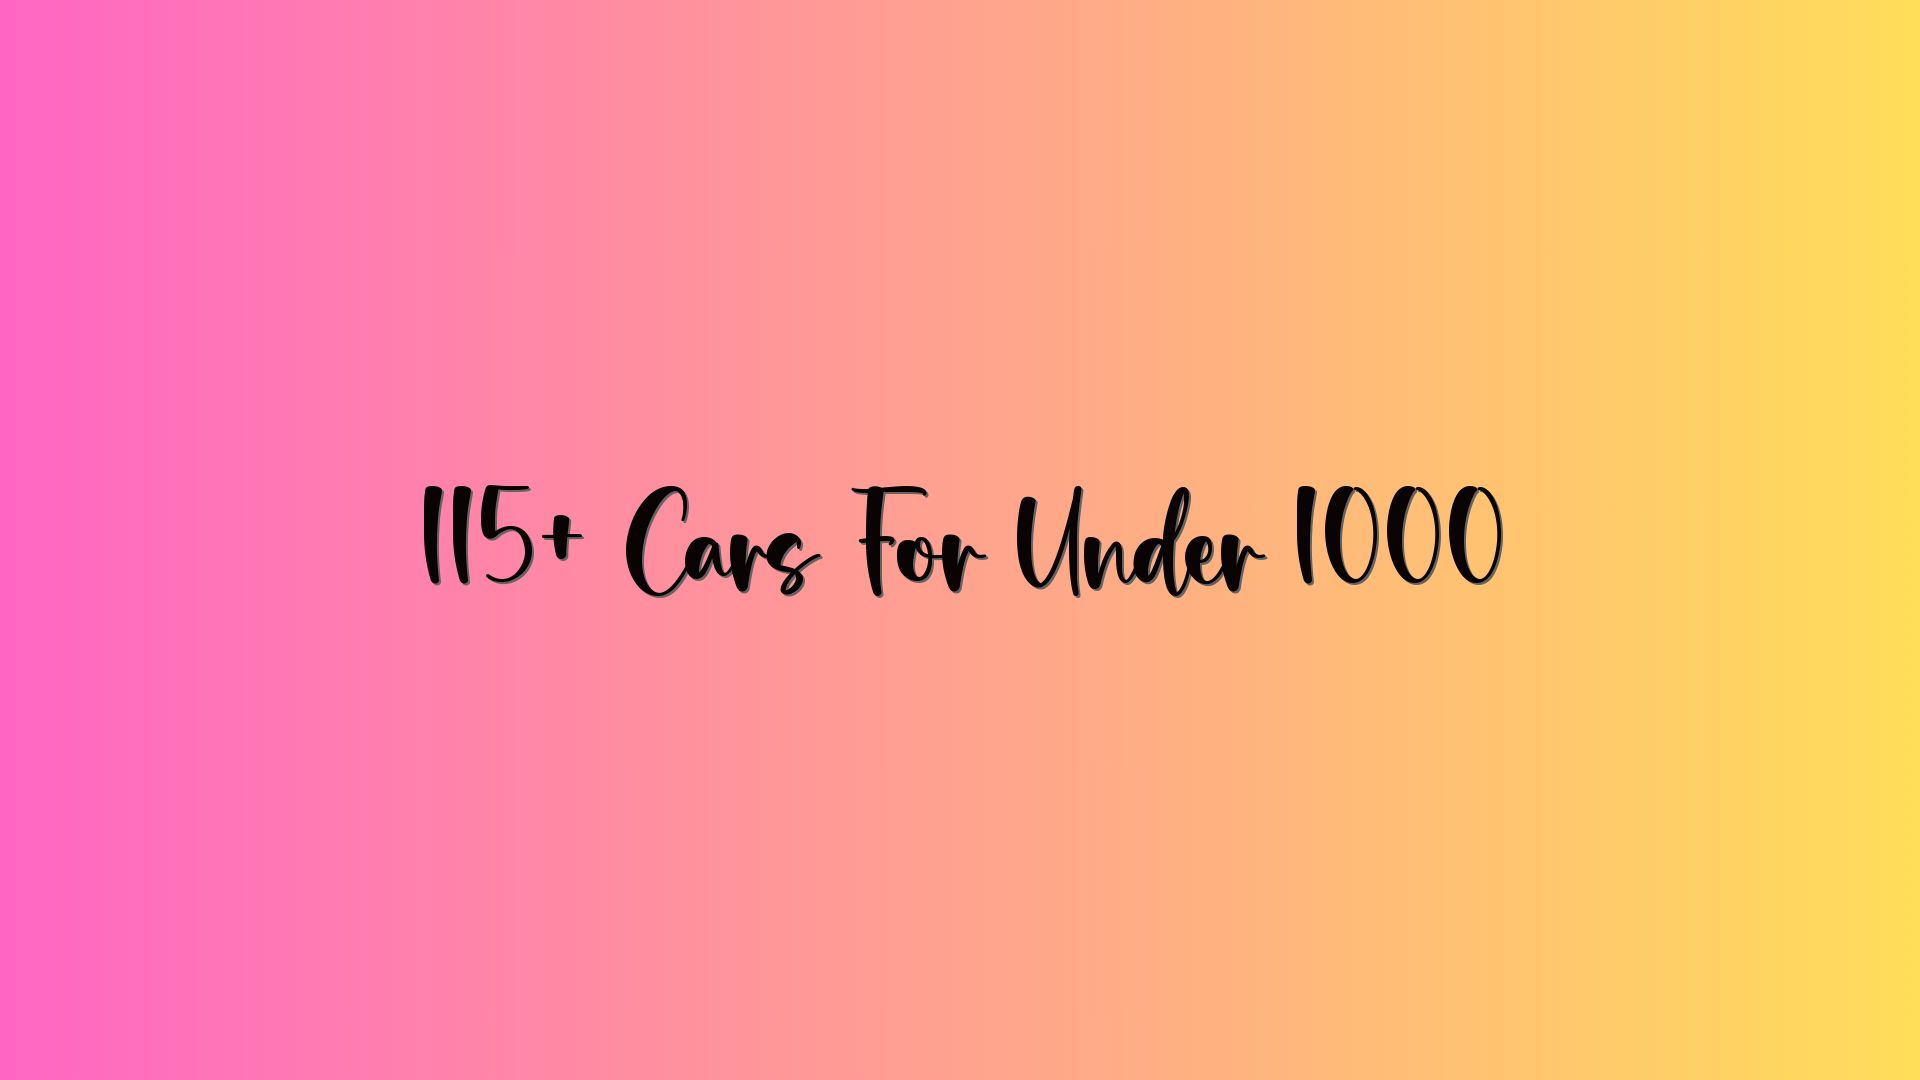 115+ Cars For Under 1000